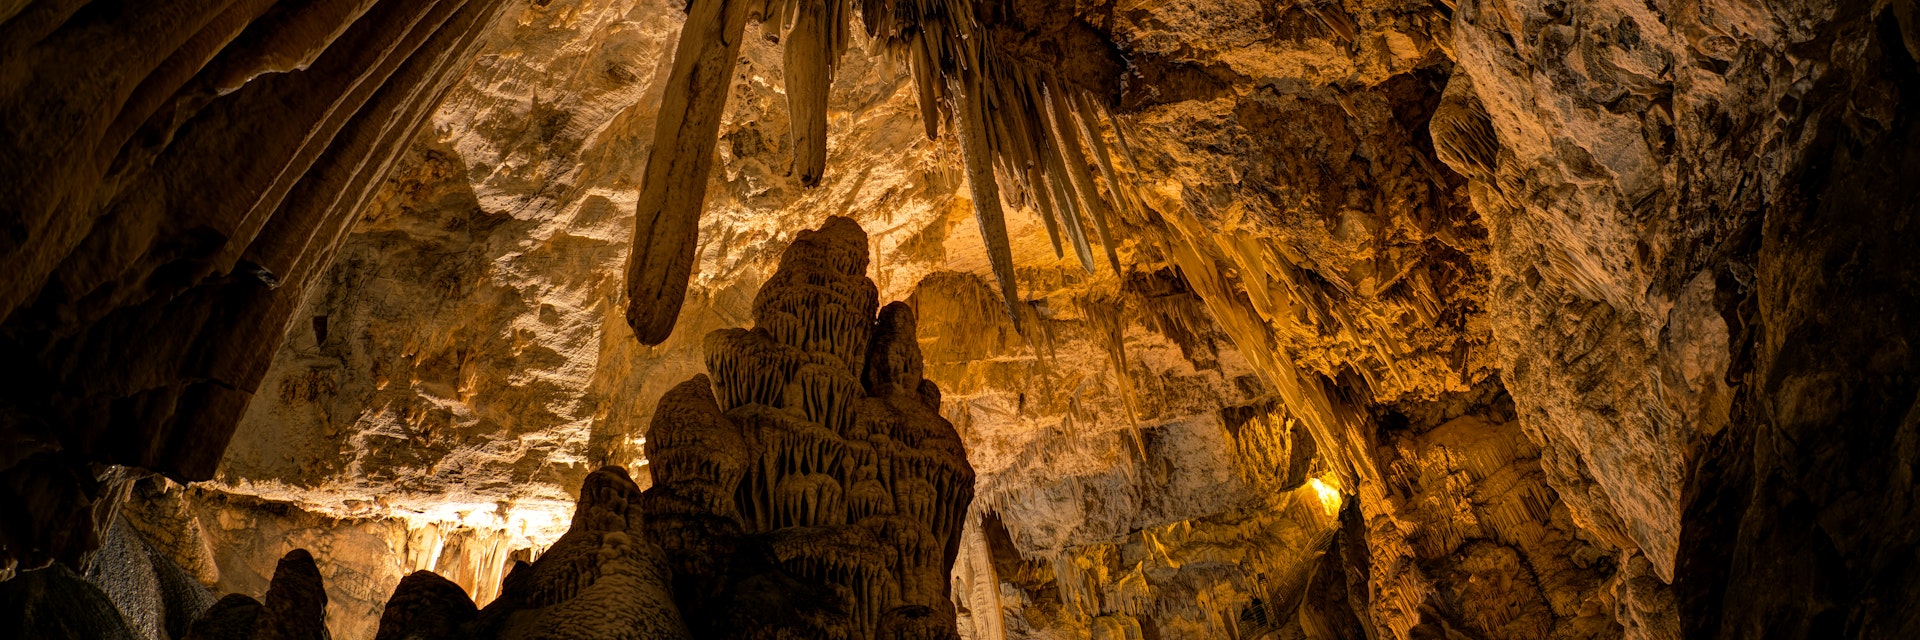 Stalactites and stalagmites in the cave of Antiparos.